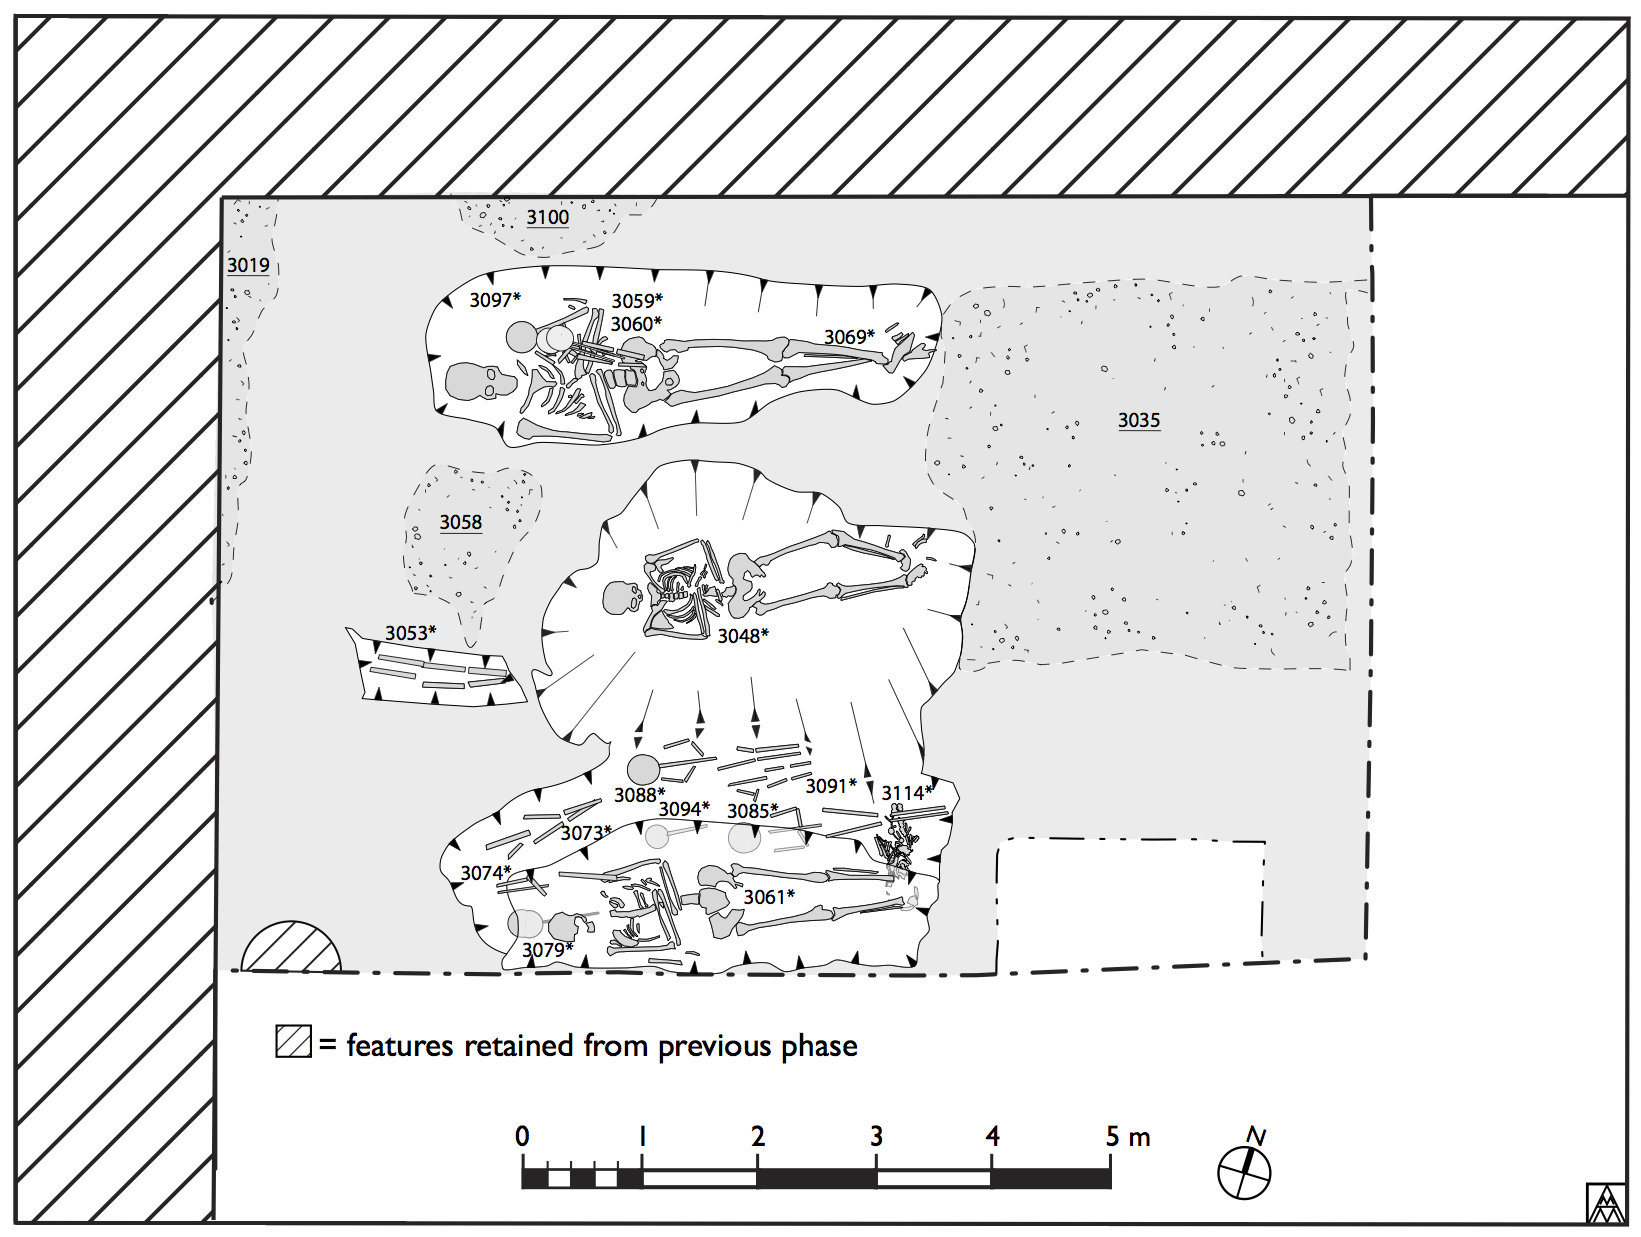 Figure 11. Plan of pavement 3058=3035=3019=3100 cut by 14th century graves (Margaret Andrews).